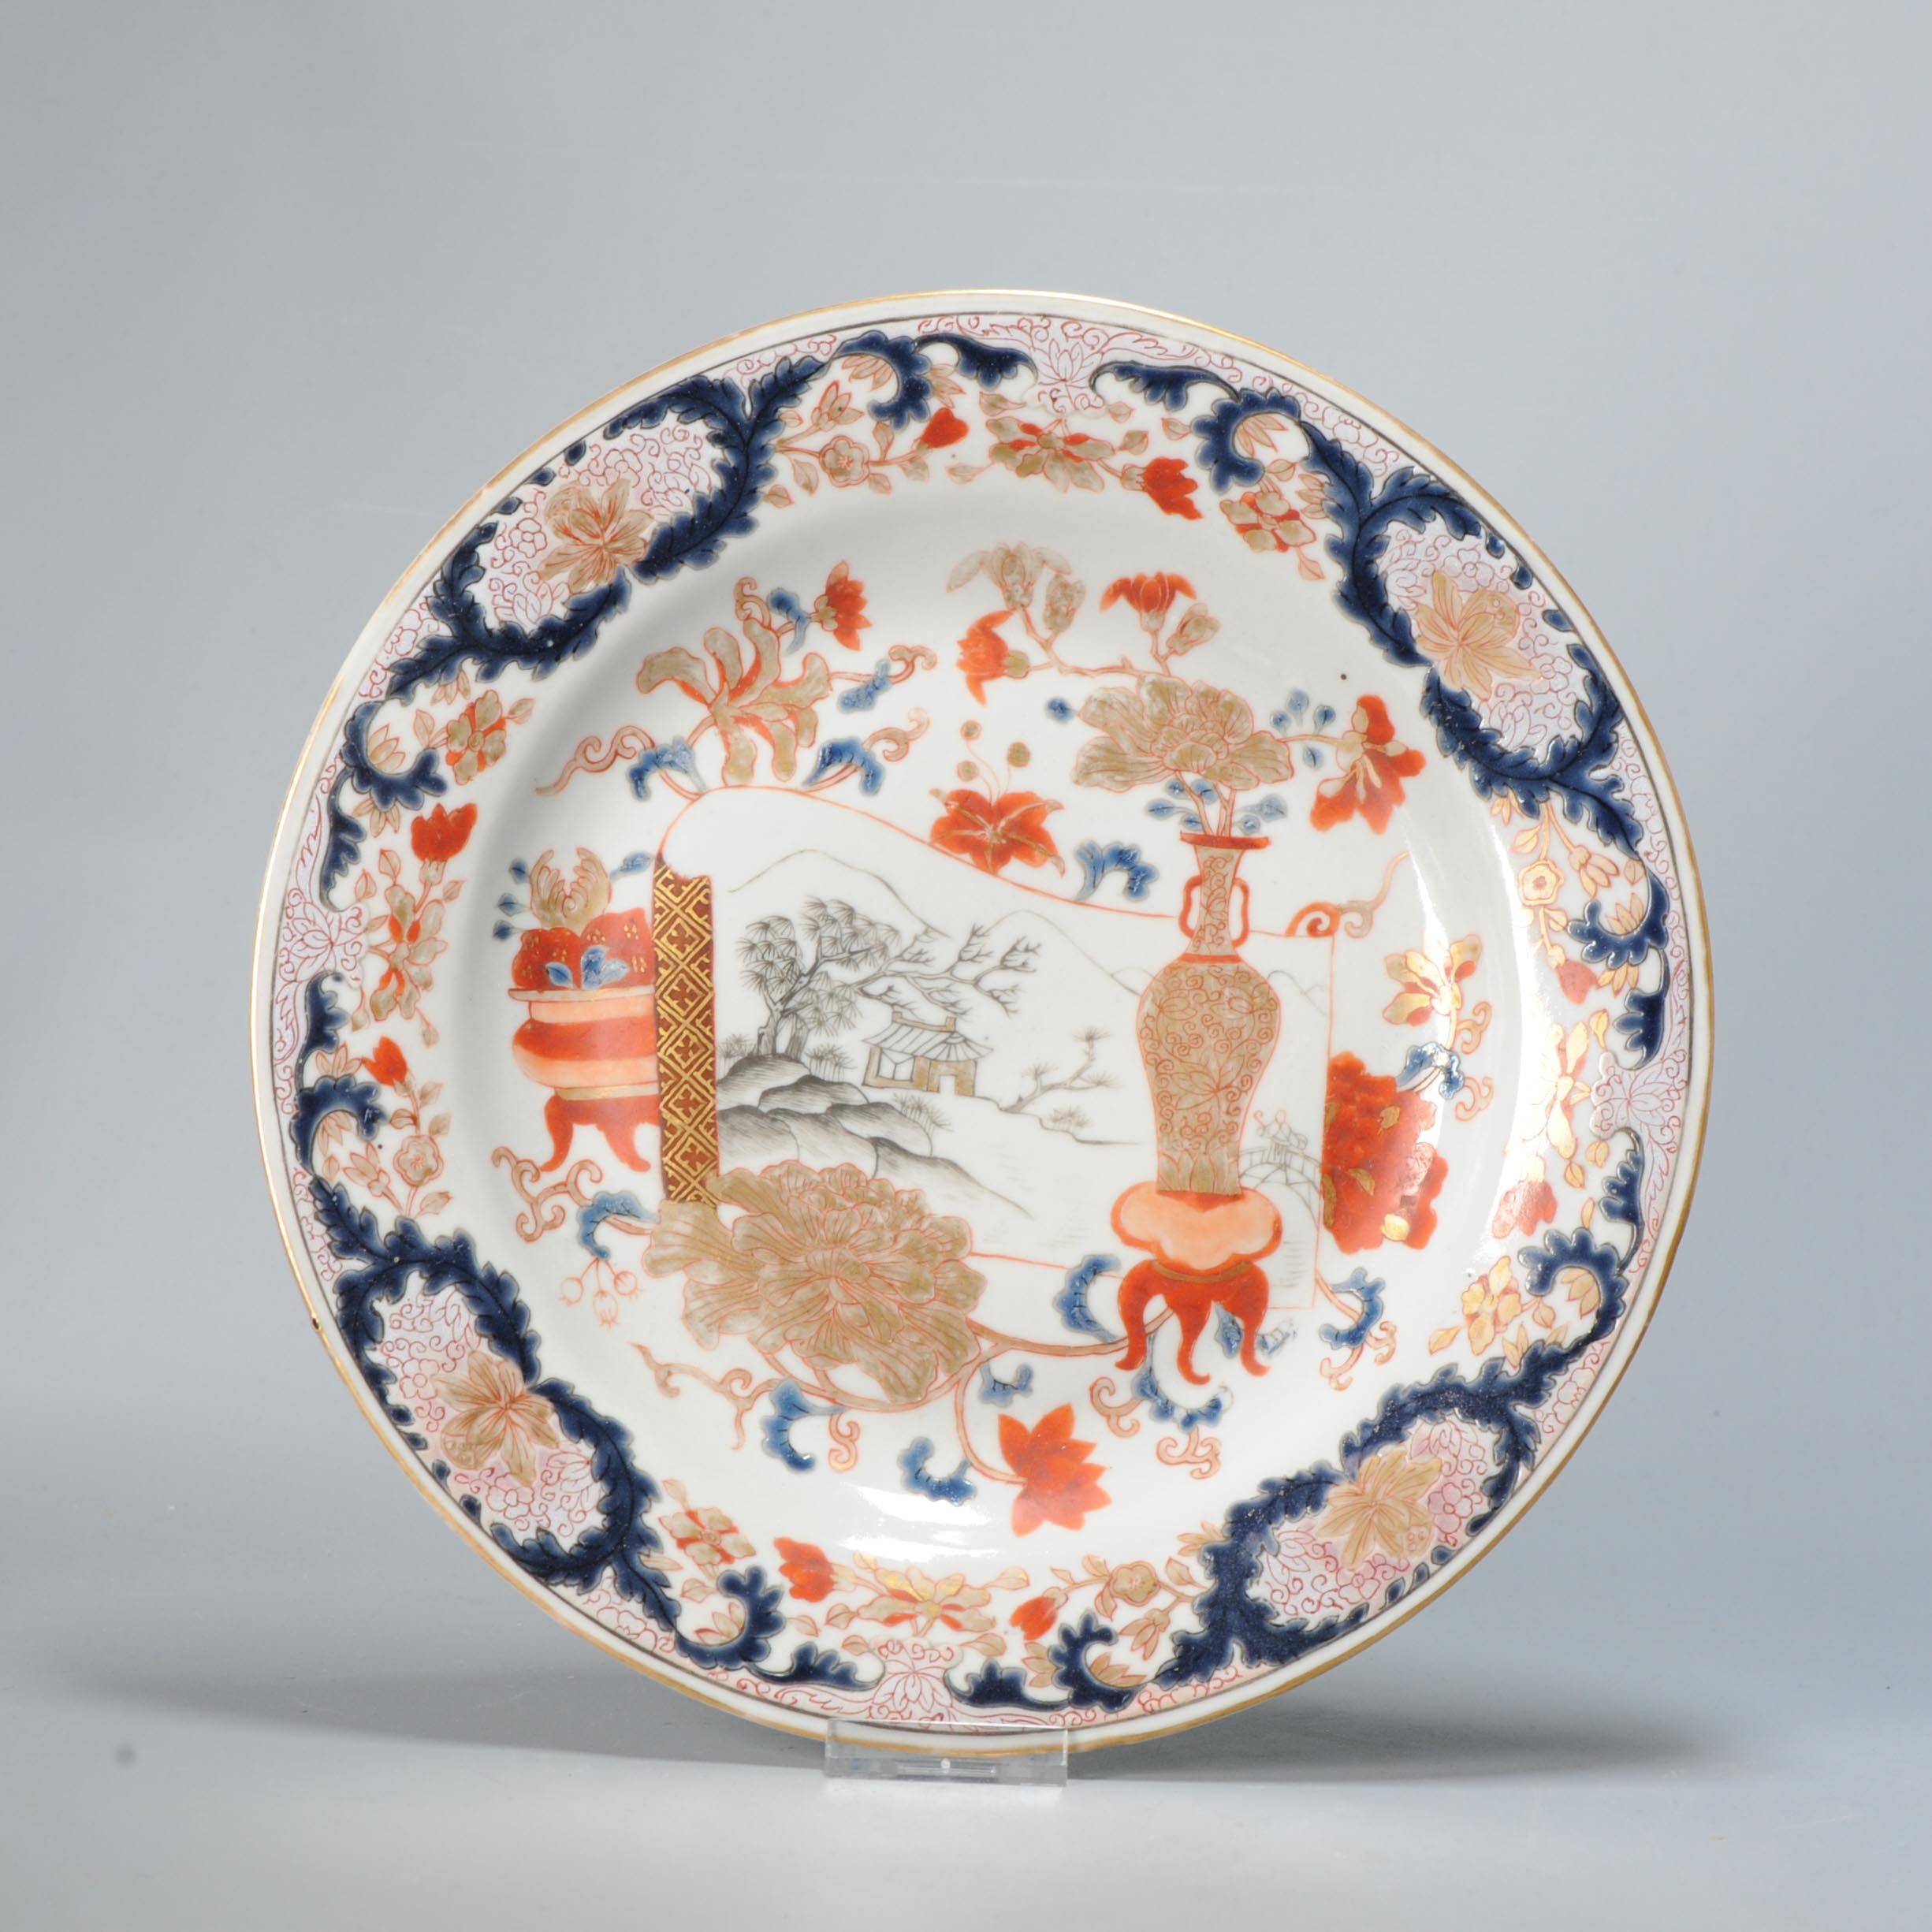 0974 A very nicely painted Famille Rose plate with underglaze blue en Encre de Chine